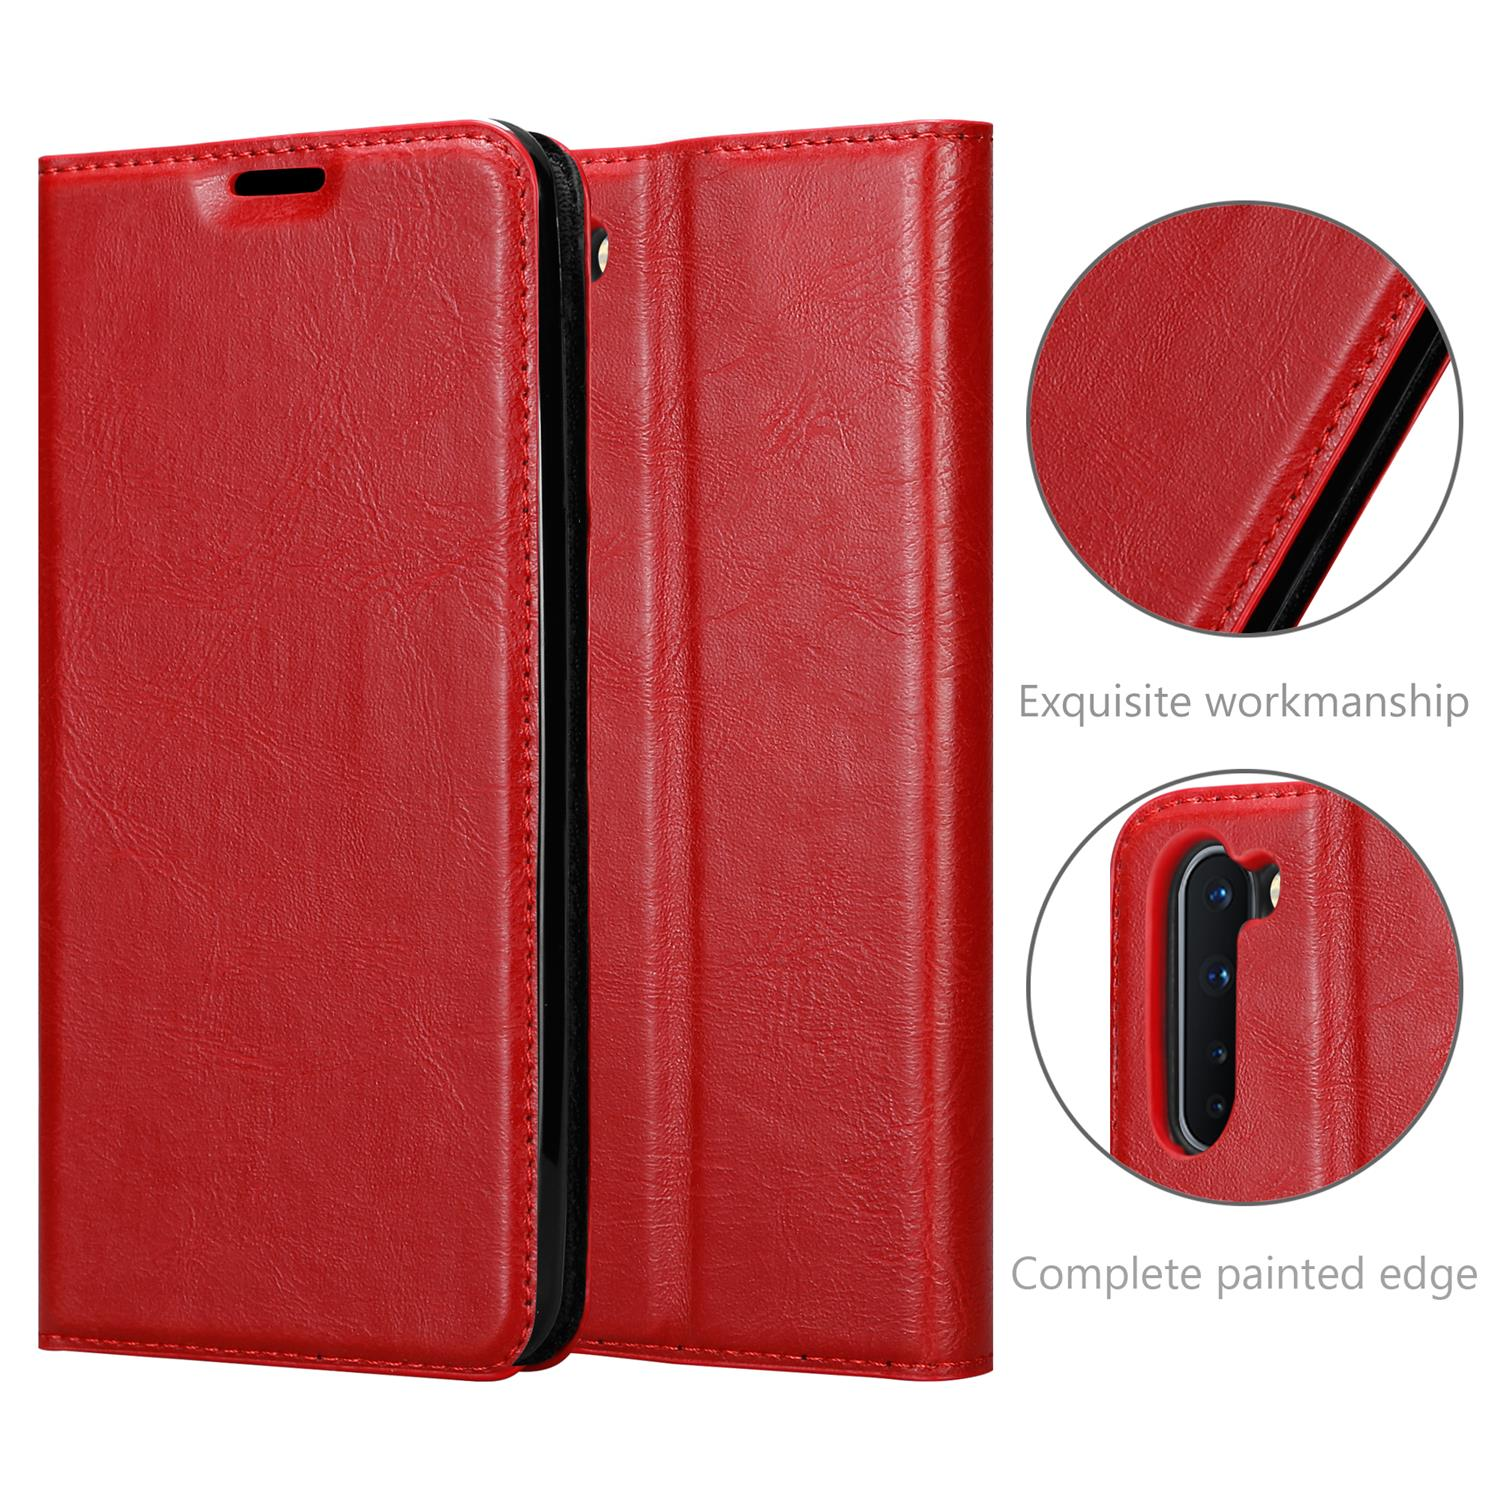 APFEL Invisible CADORABO ROT Magnet, OnePlus, Hülle Nord, Book Bookcover,